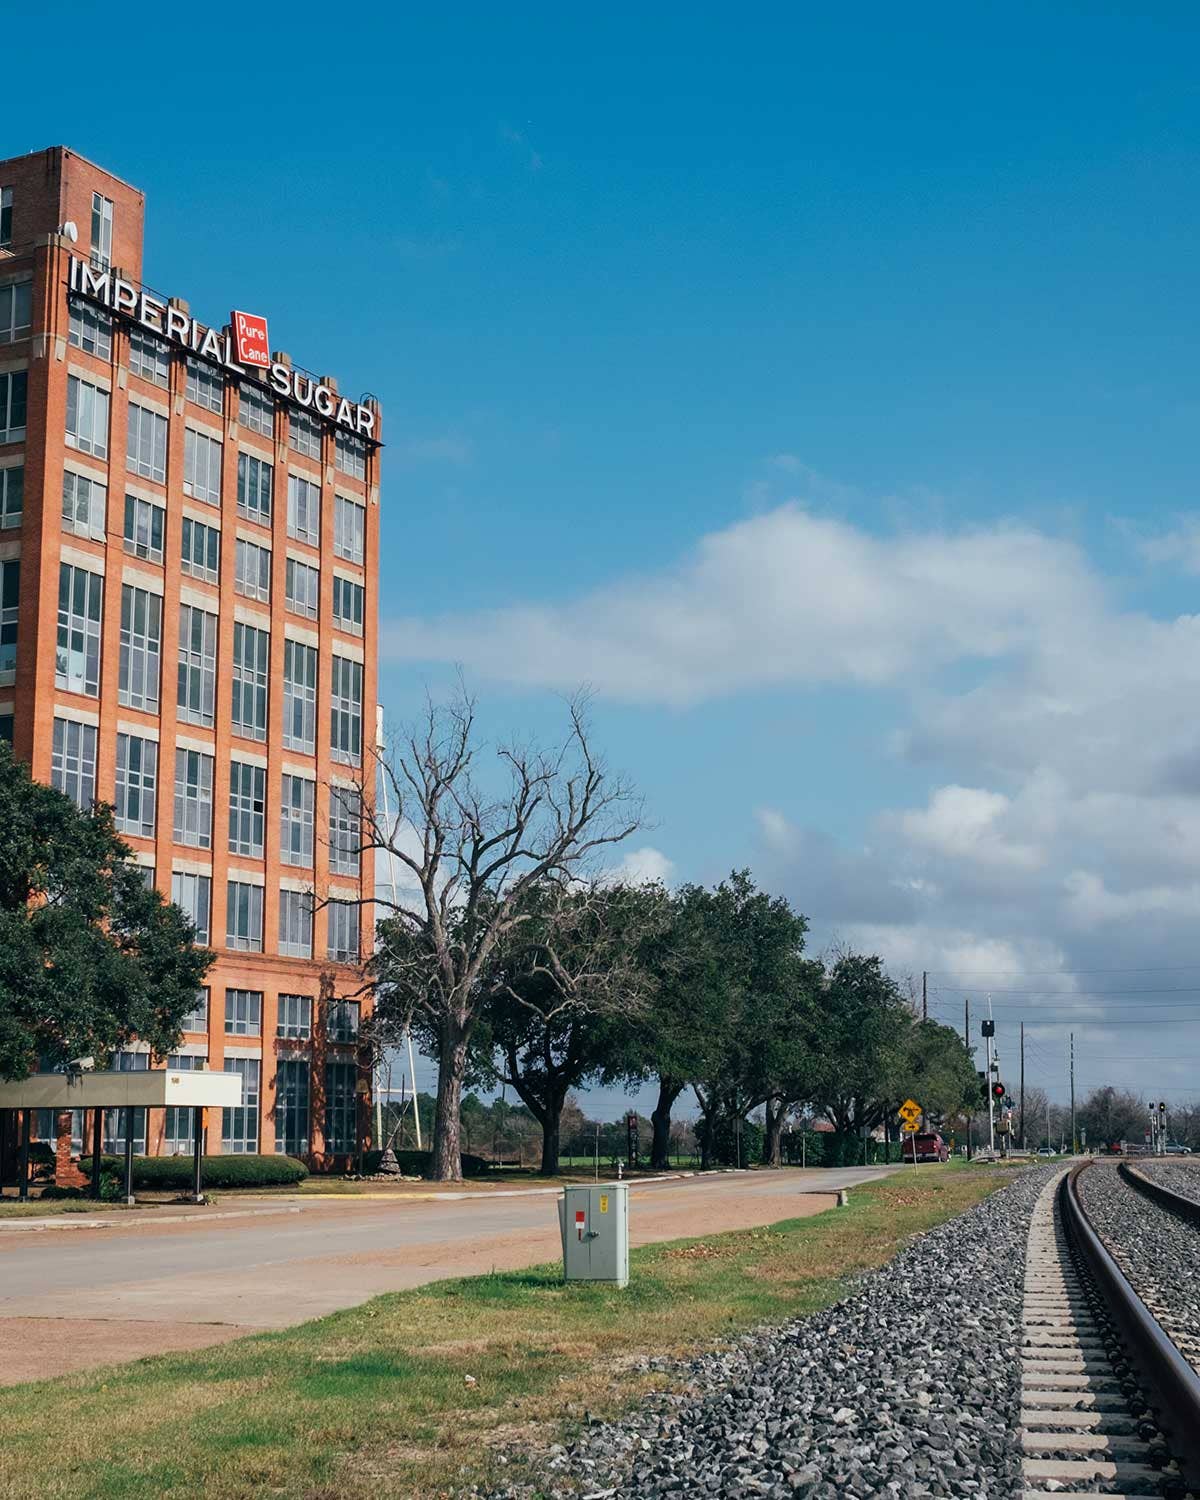 How the City of Sugar Land, Texas Got Its Name